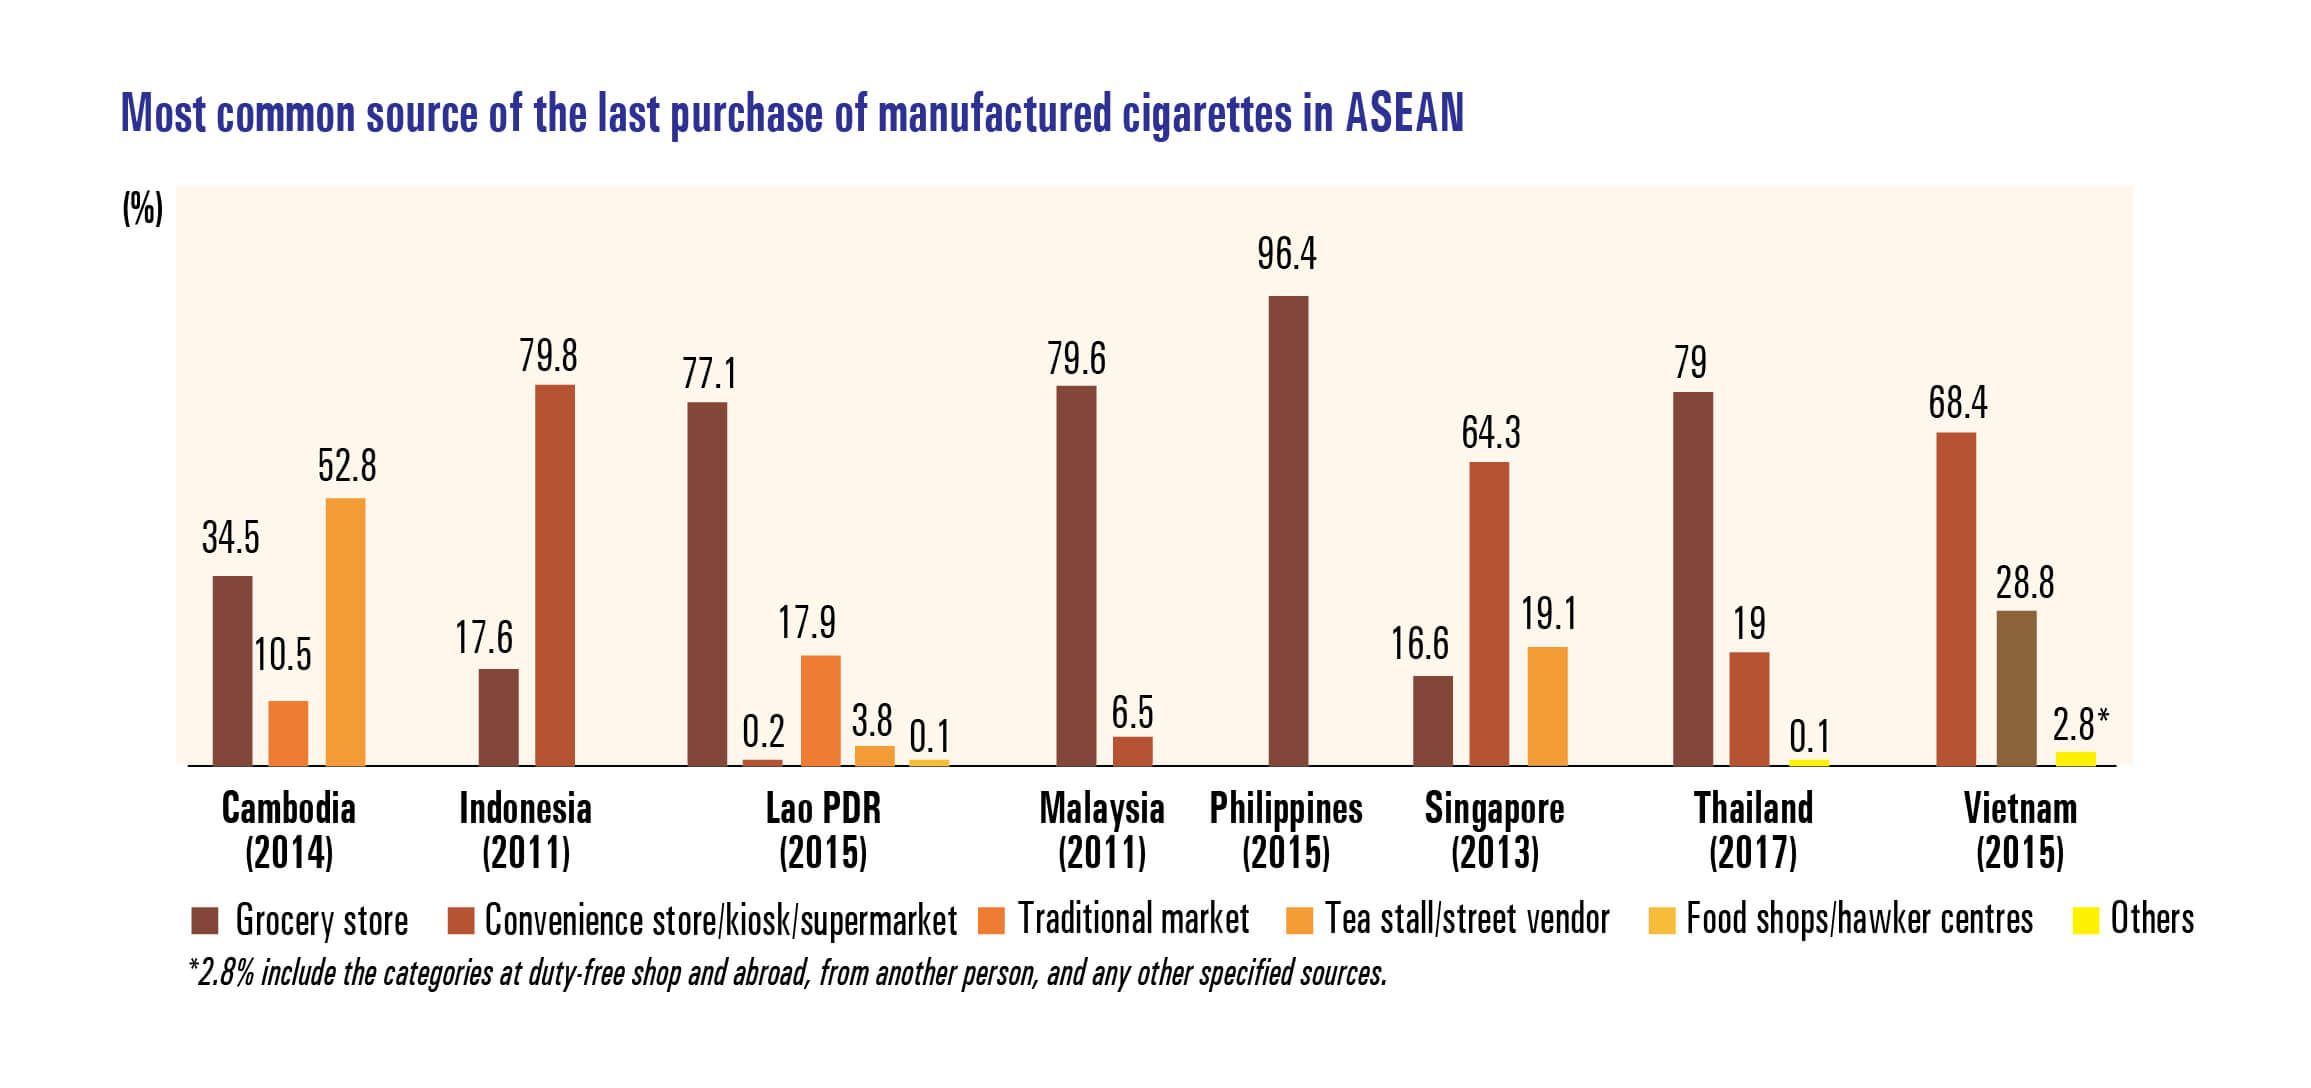 Most common source of the last purchase of manufactured cigarettes in ASEAN